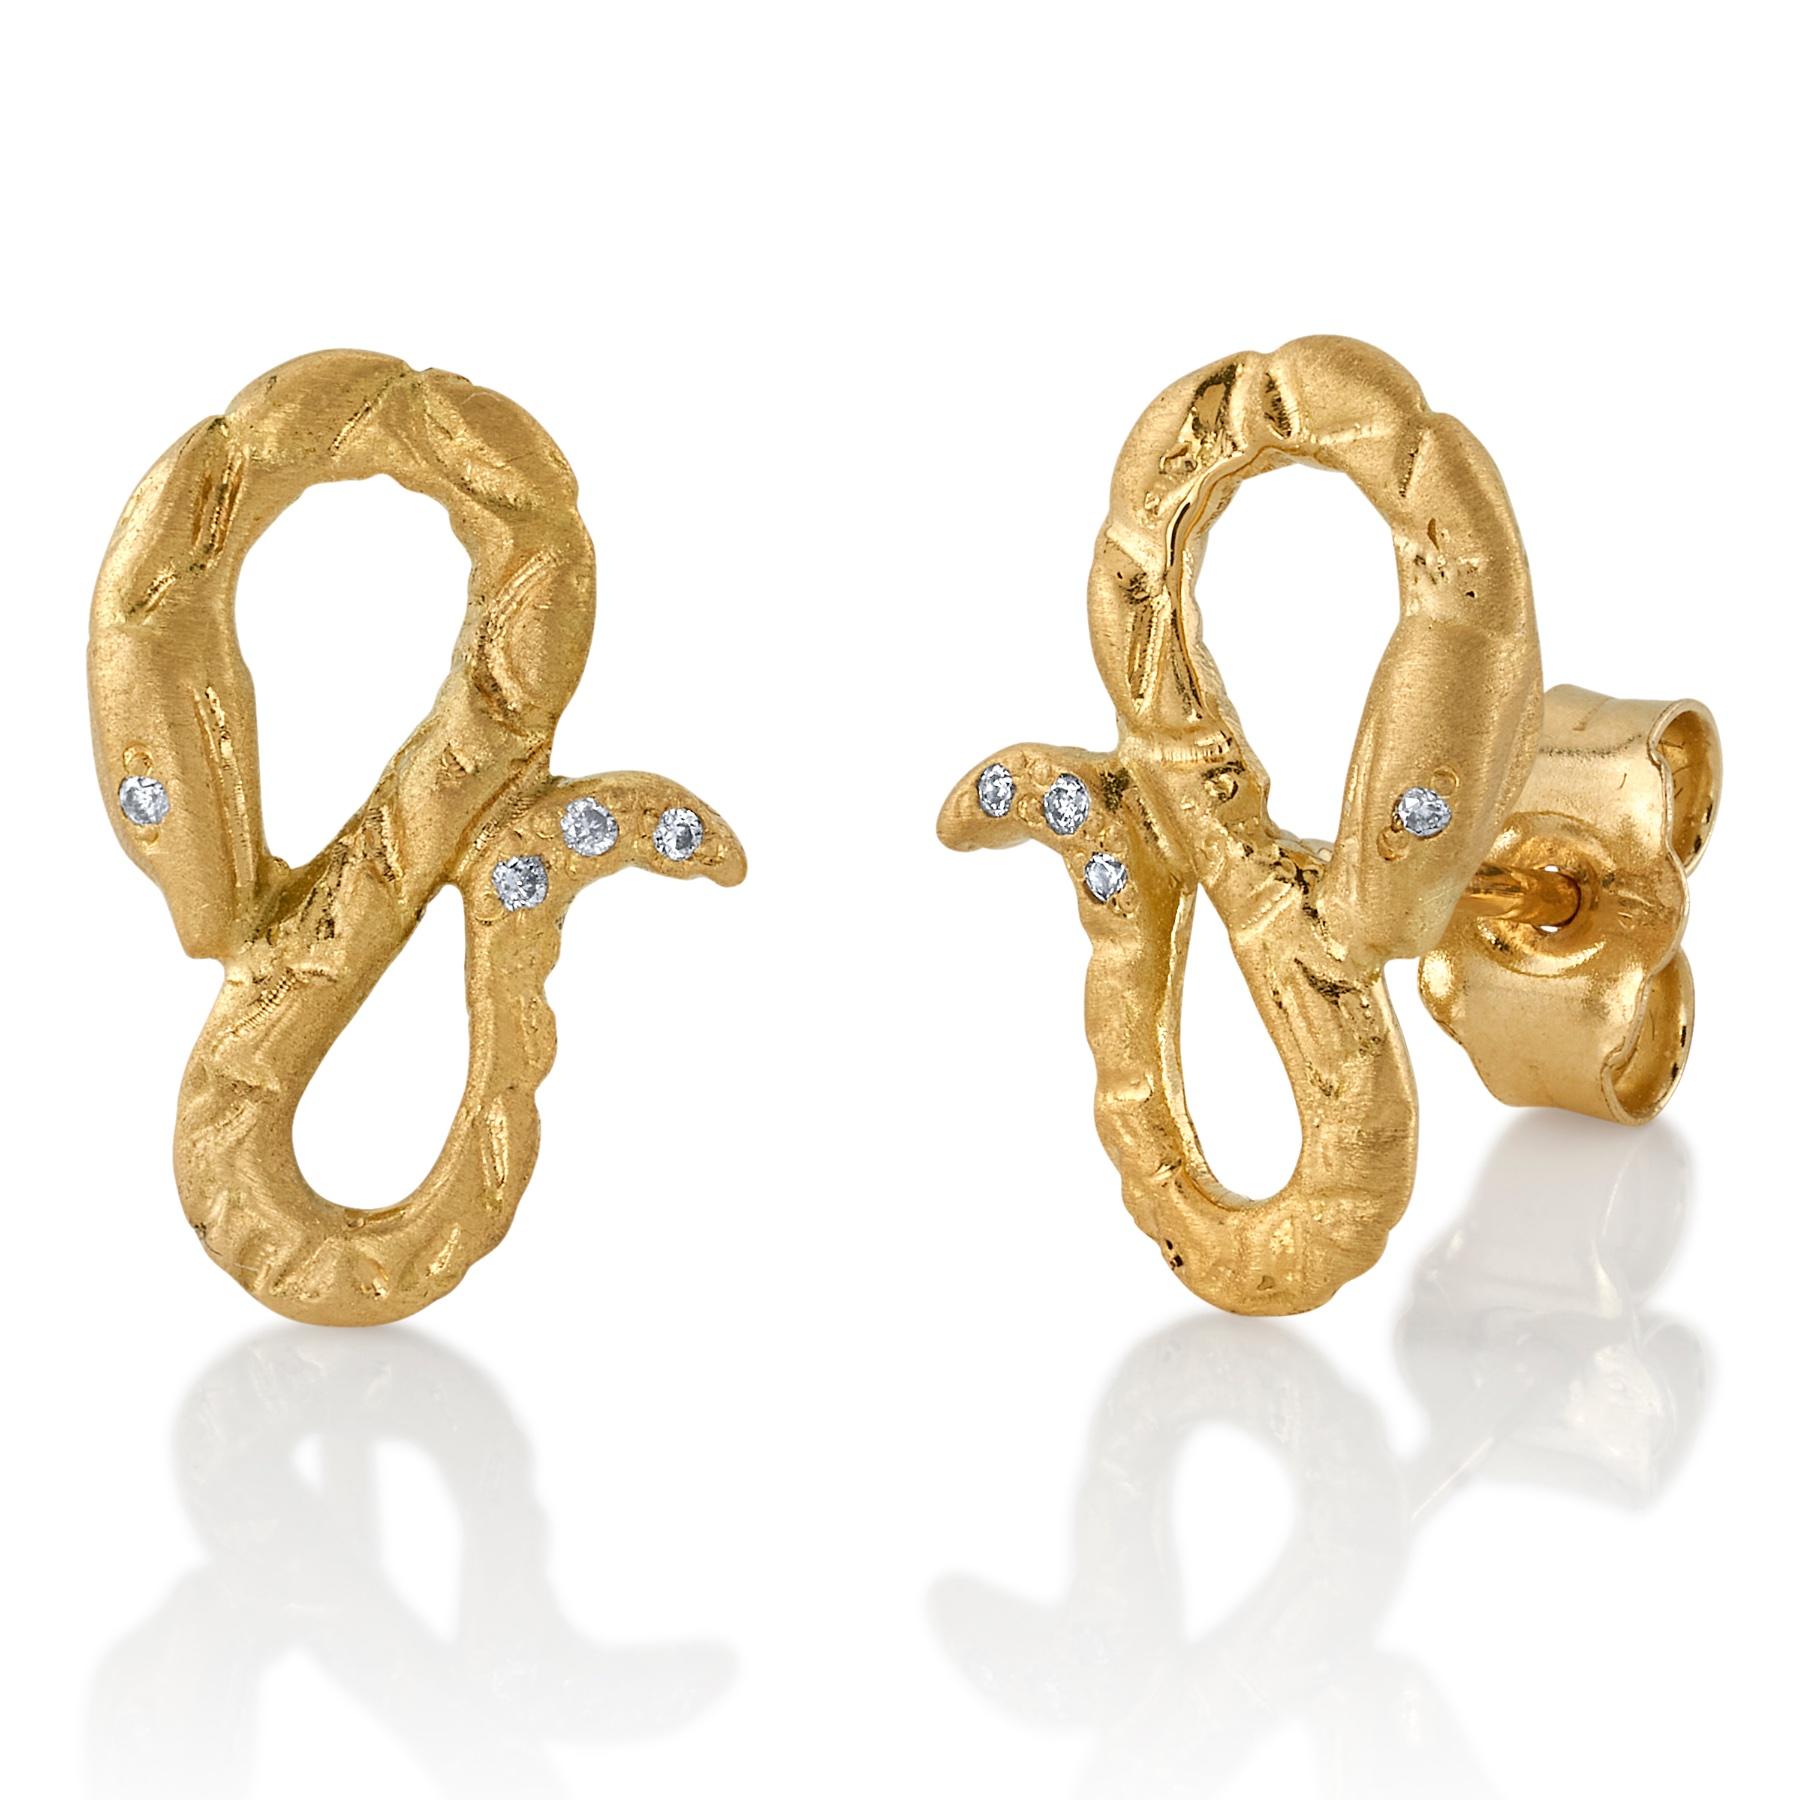 Contemporary House of RAVN, 18k Gold Hand Carved Coiled Serpent Earrings/ Snake Stud Earrings For Sale